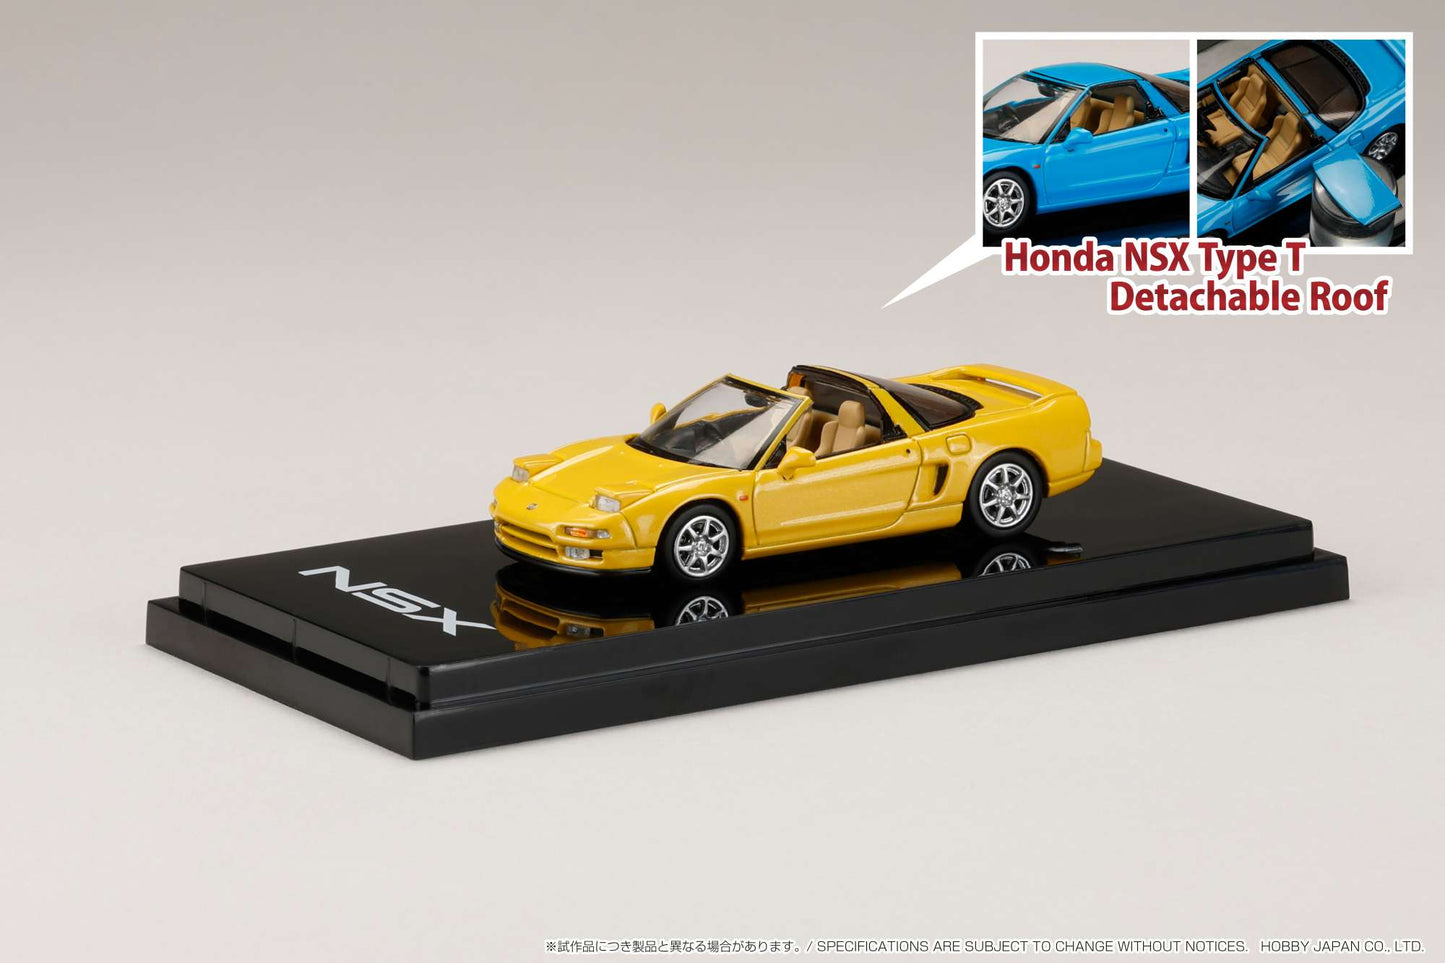 Hobby Japan 1/64 Honda NSX Type T with Detachable Roof in Indy Yellow Pearl